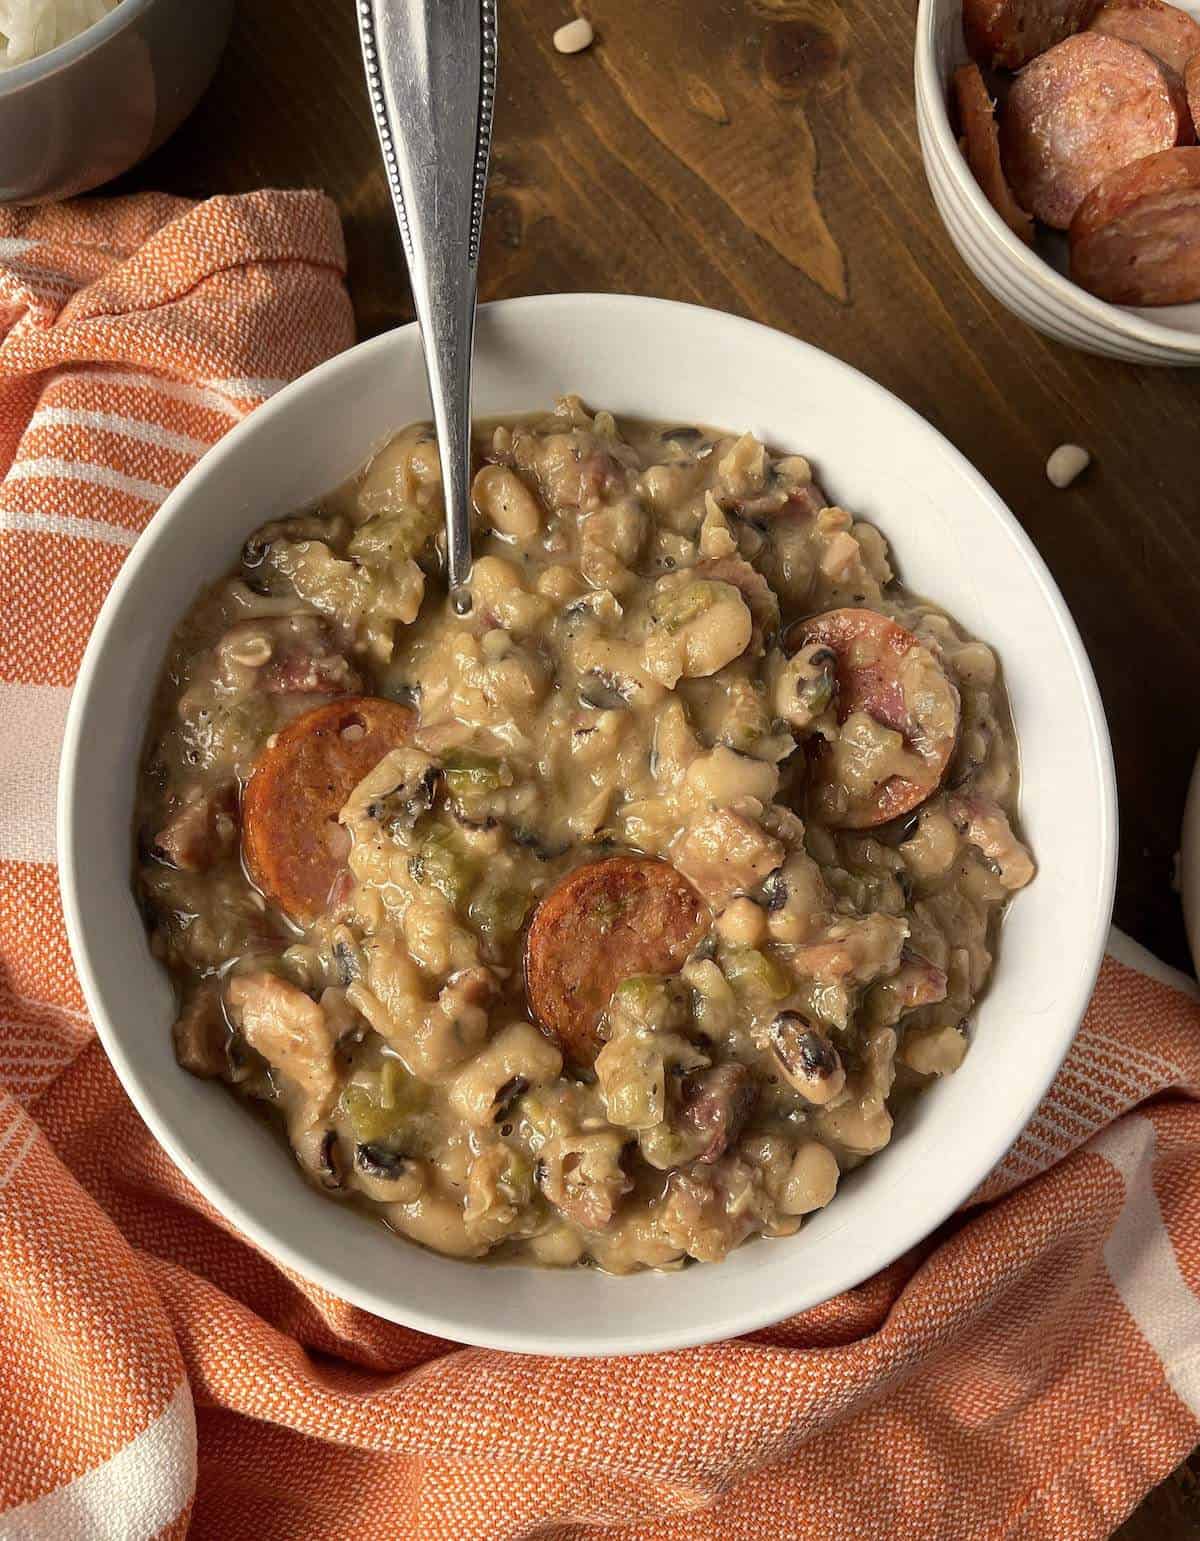 A white bowl of hoppin' john black eyed peas with a spoon, a small bowl of sausage, and an orange towel.